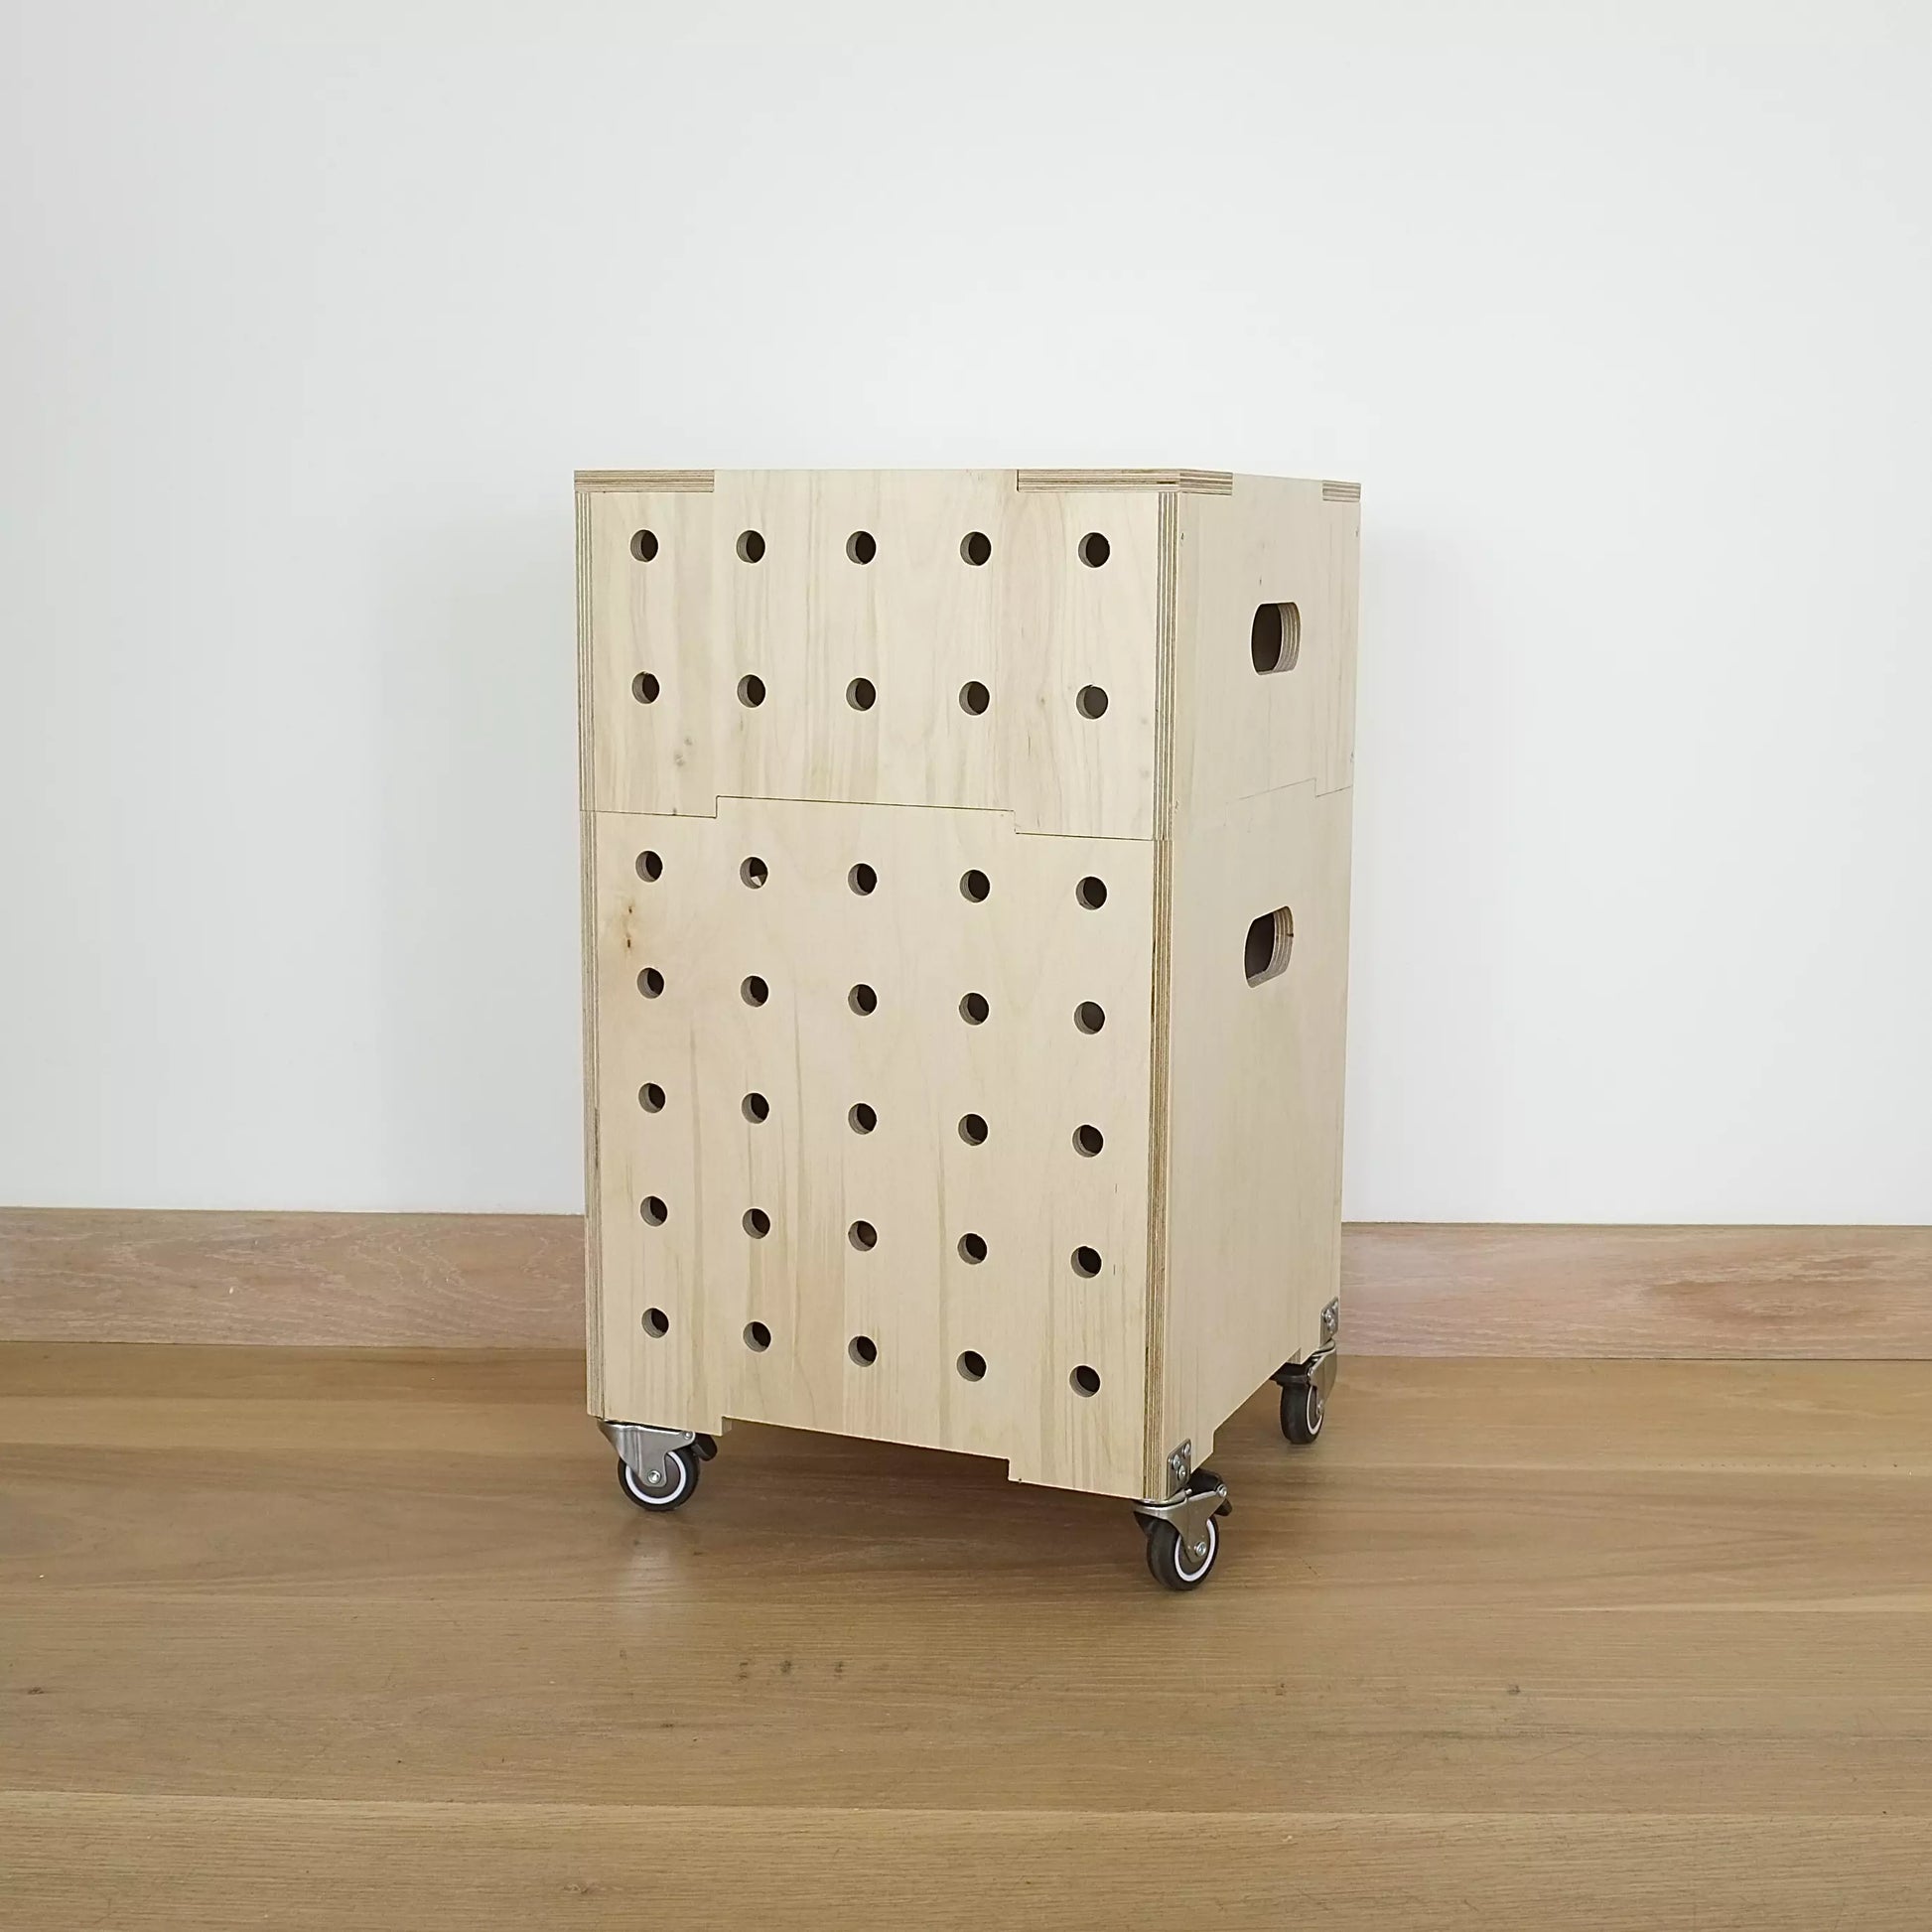 A stack of two simple pale wooden square shaped storage crates faces diagonally to the left, with seven rows of holes cut in front facet, castors and a wooden lid, sitting on a wooden floor.